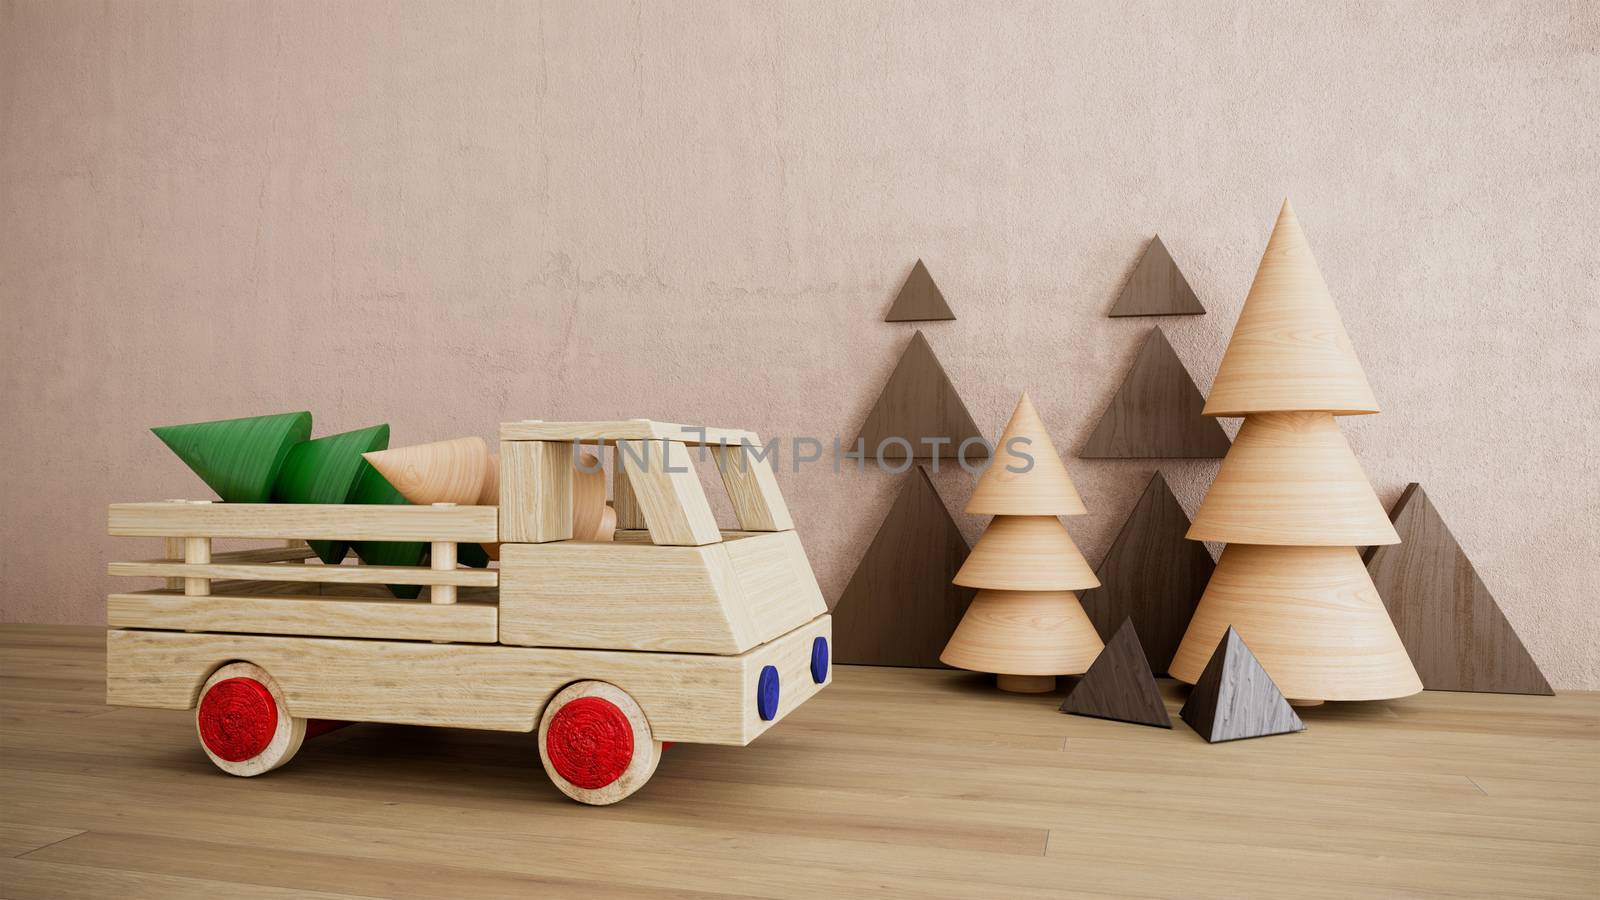 Wooden toy with car christmas holiday photo with pine trees happy new year